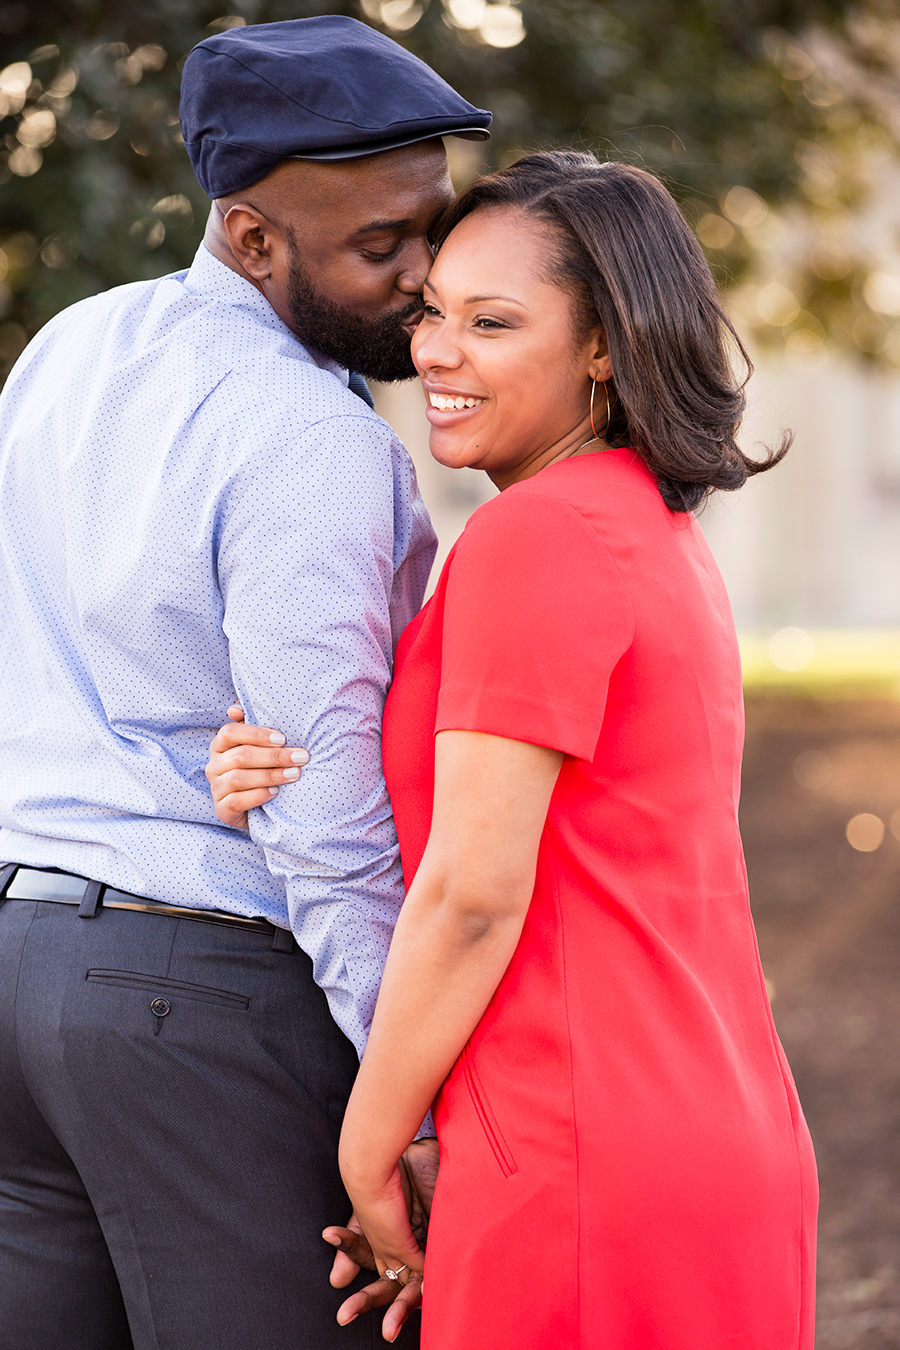 Amber  Julians Engagement Session at The VMFA - Image Property of www.j-dphoto.com